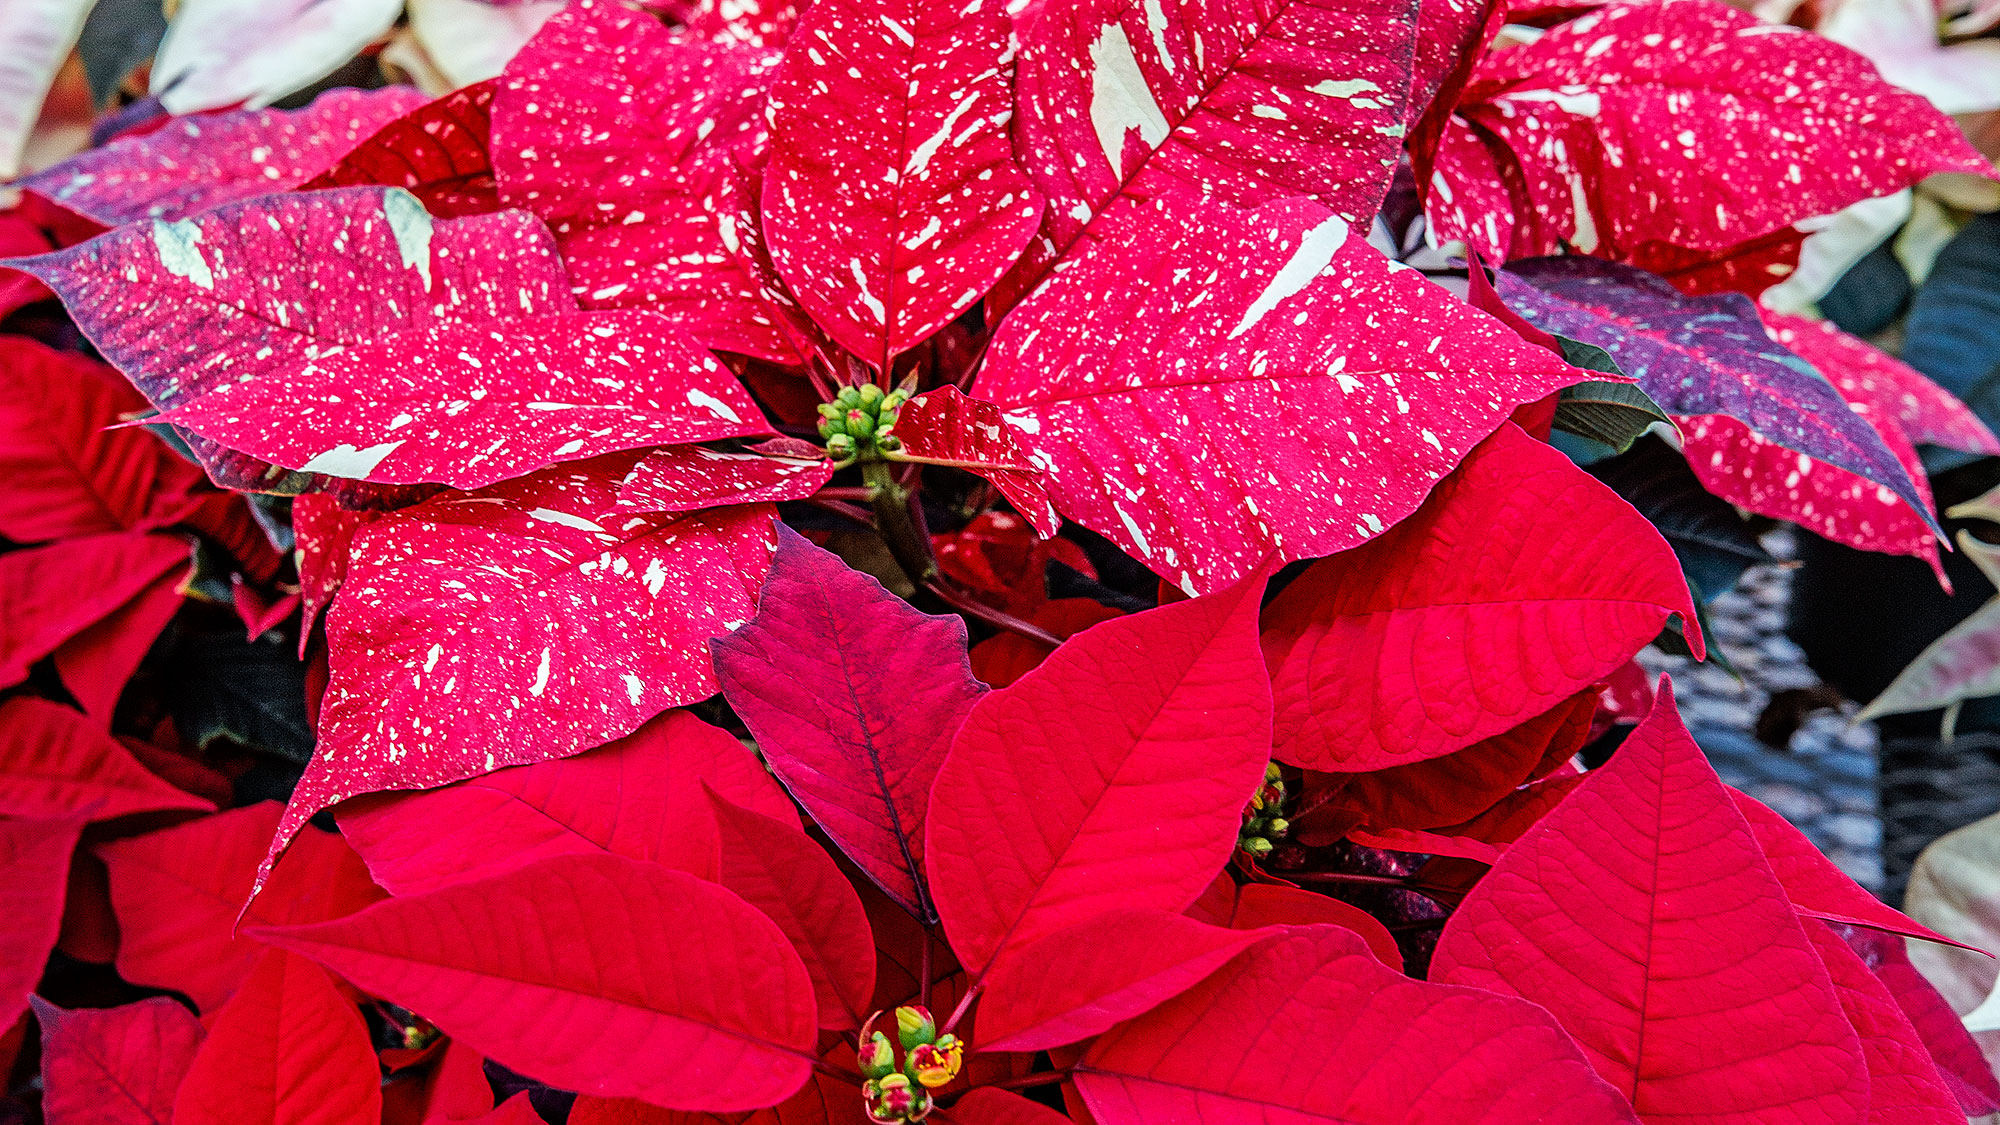 The Horticulture Club's annual poinsettia sale is online until Nov. 13.